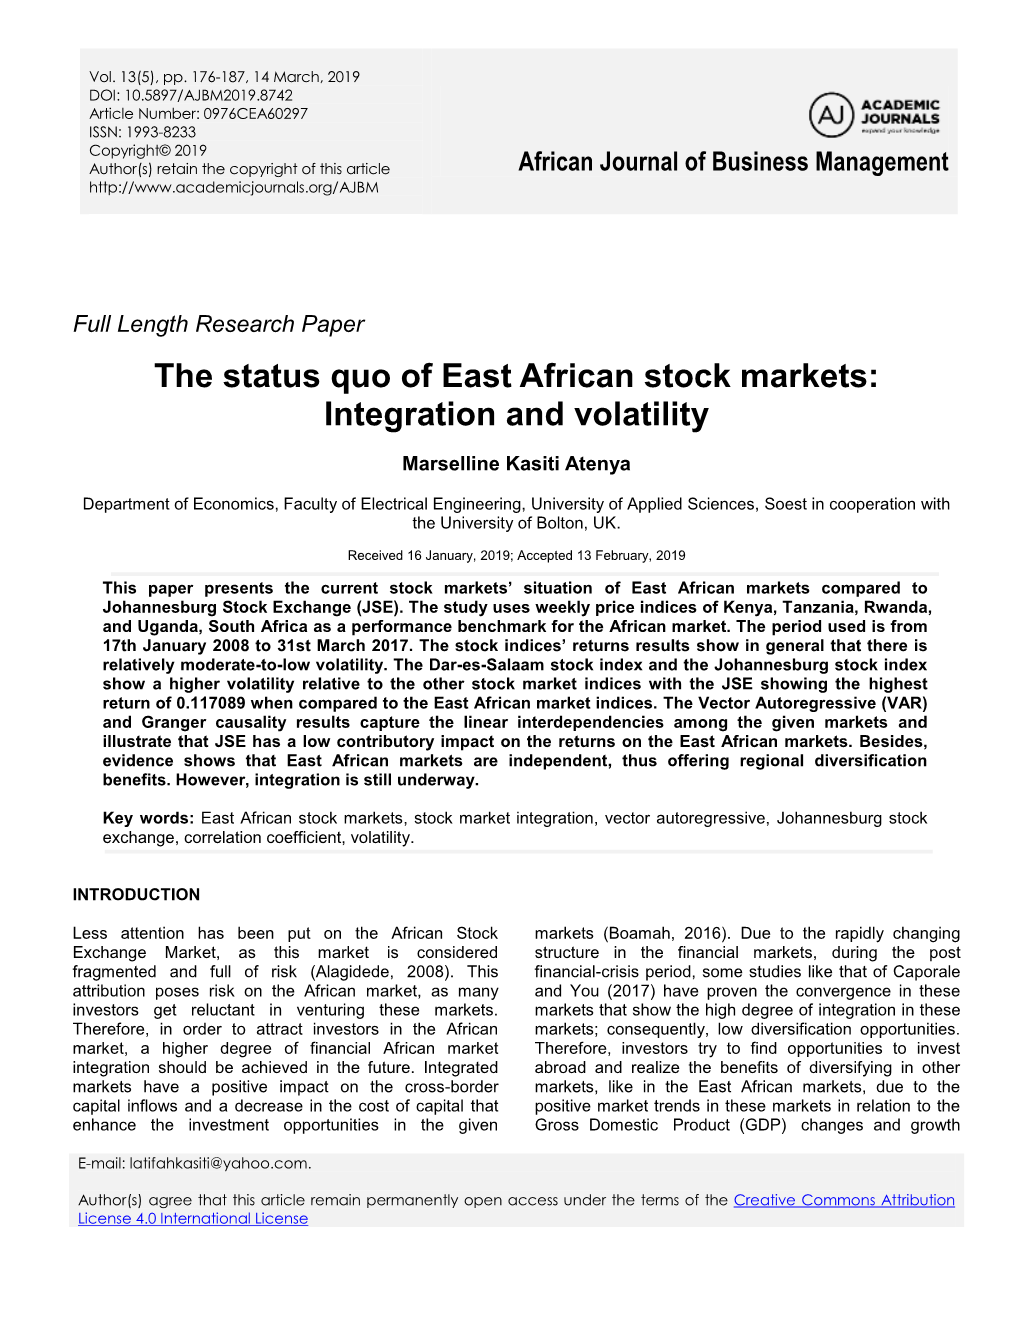 The Status Quo of East African Stock Markets: Integration and Volatility